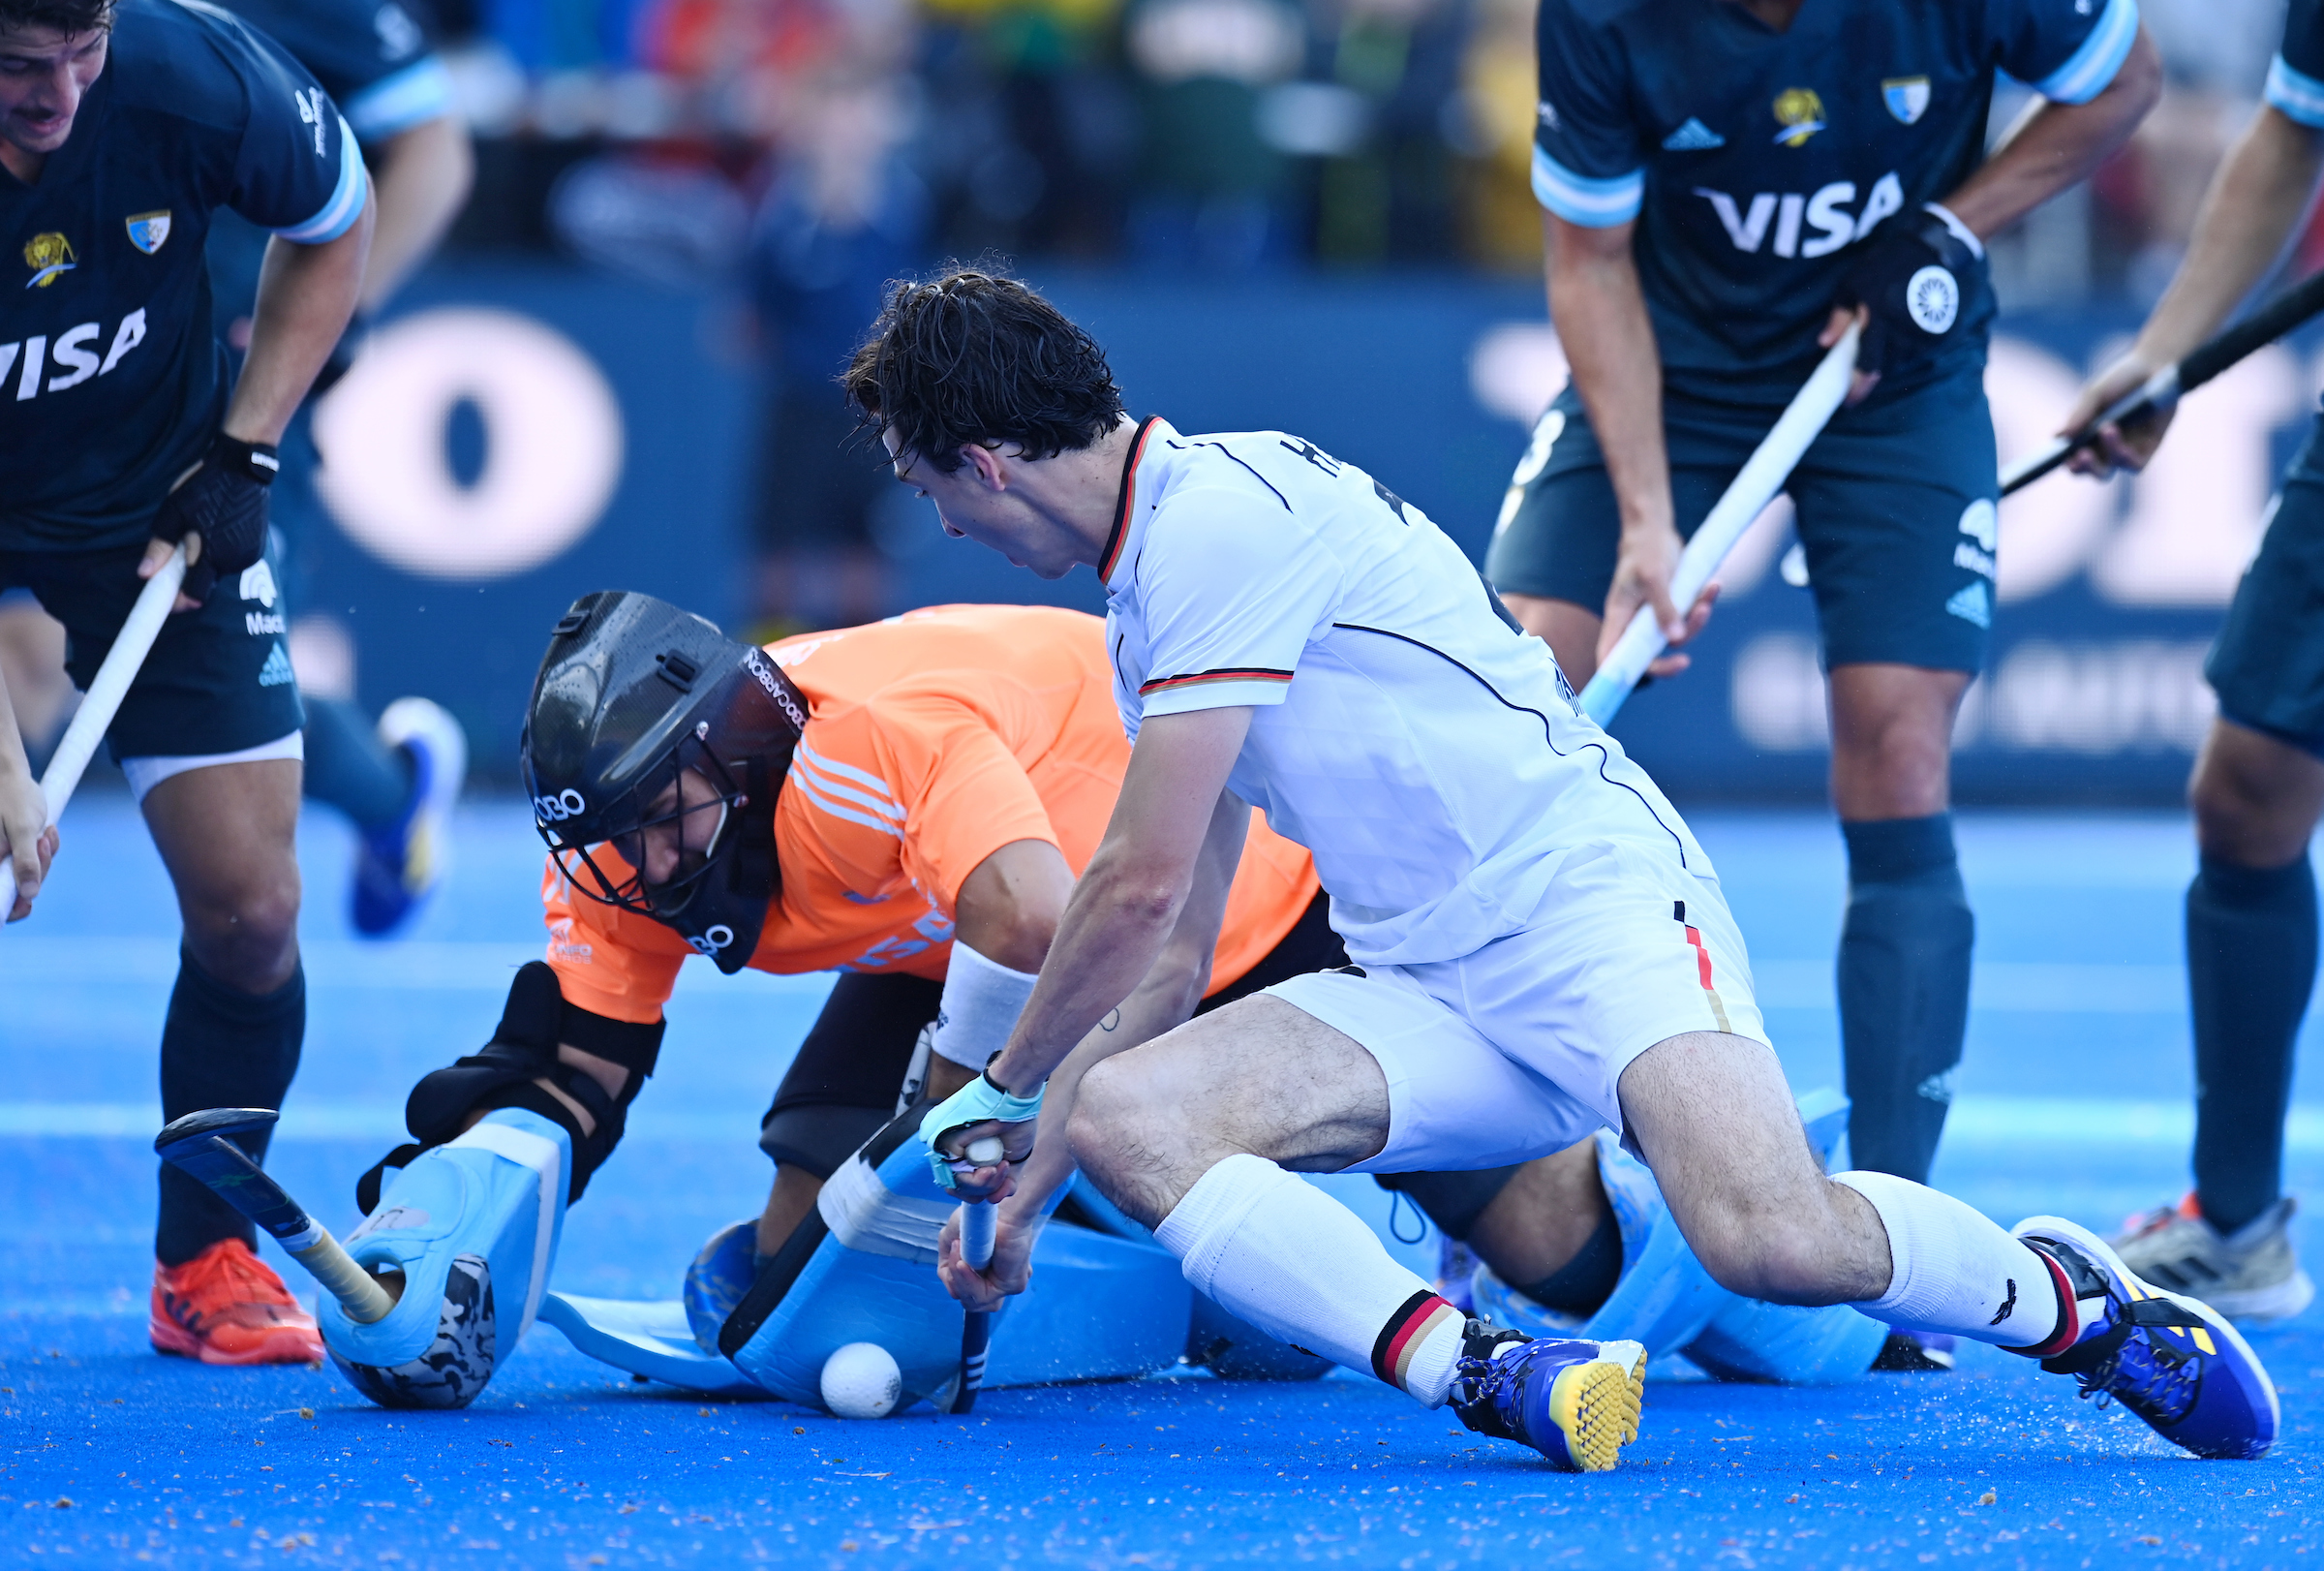 WSP22052217447 - Pro-League: Honamas Win Spectacle Against Argentina - What the Danas hadn't been able to do before, the Honamas showed in the first of two FIH Pro League games on the Ernst-Reuter-Sportfeld (Berlin) against Argentina. Coach André Henning's team won spectacularly and deserved a 6-3 victory over the South Americans. The goals for the Honamas were scored by Tom Grambusch with a penalty, Raphael Hartkopf after a penalty corner, Thies Prinz twice and Gonzalo Peillat twice after penalty corners. Nicolas Keenan, Thomas Habif and Santiago Tarazona scored for the Argentines.